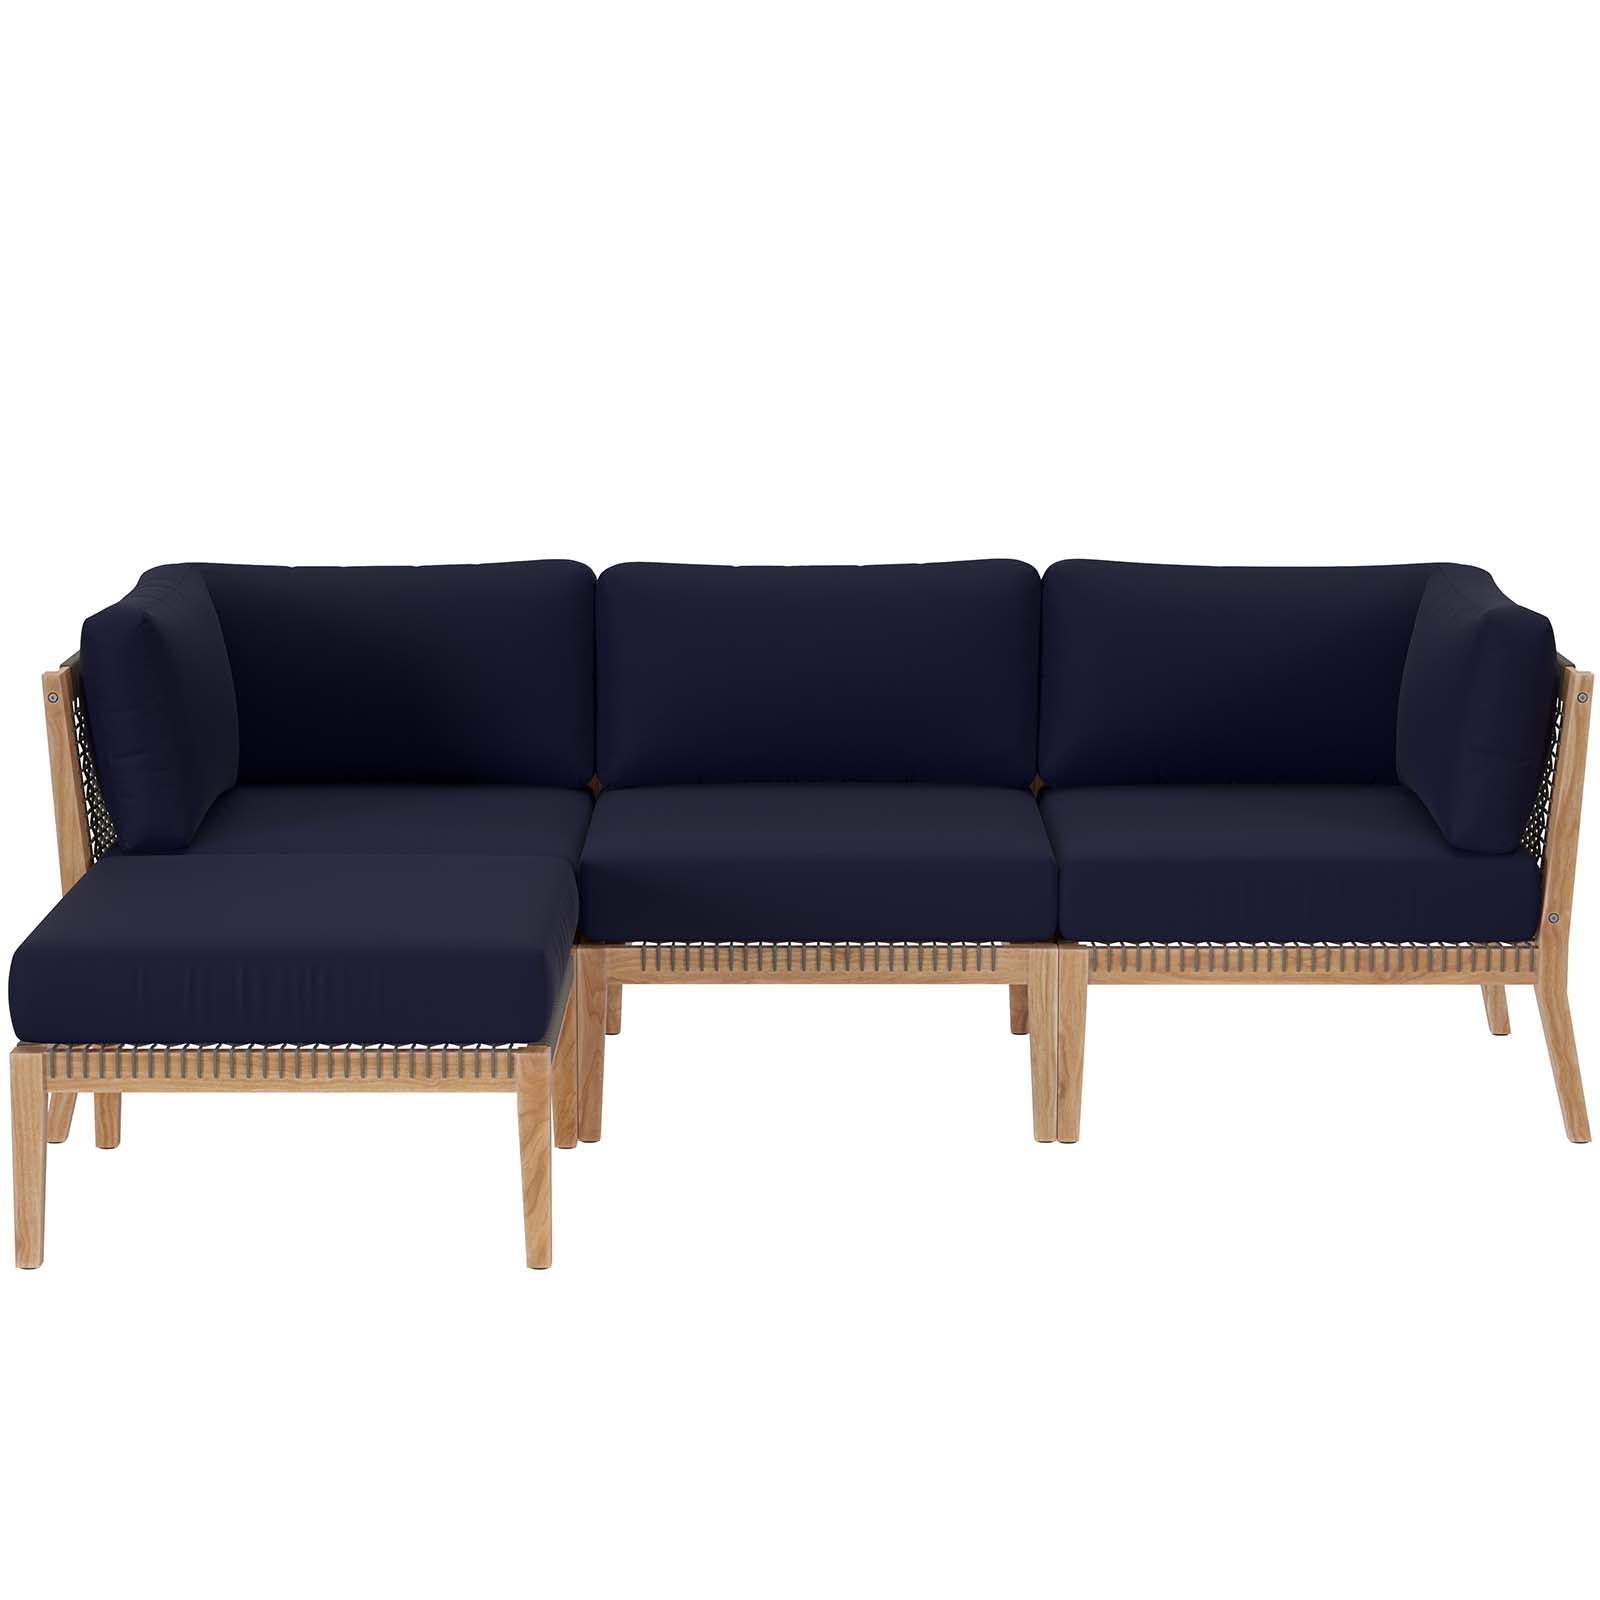 Modway Outdoor Sofas - Clearwater-Outdoor-Patio-Teak-Wood-4-Piece-Sectional-Sofa-Gray-Navy